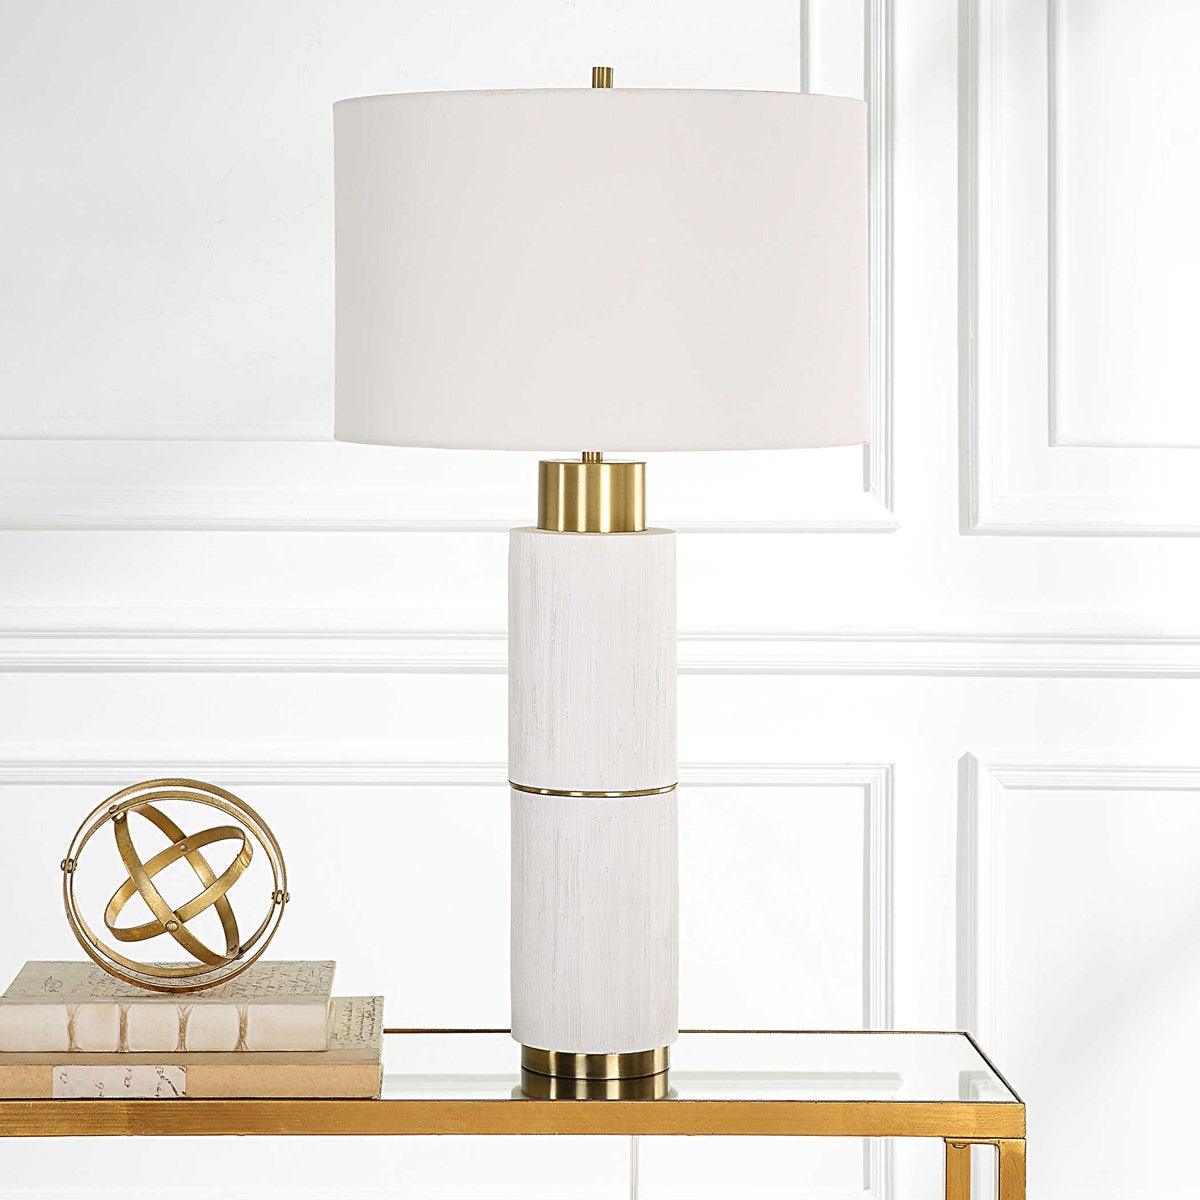 The Uttermost - Ruse Table Lamp - 30190 | Montreal Lighting & Hardware